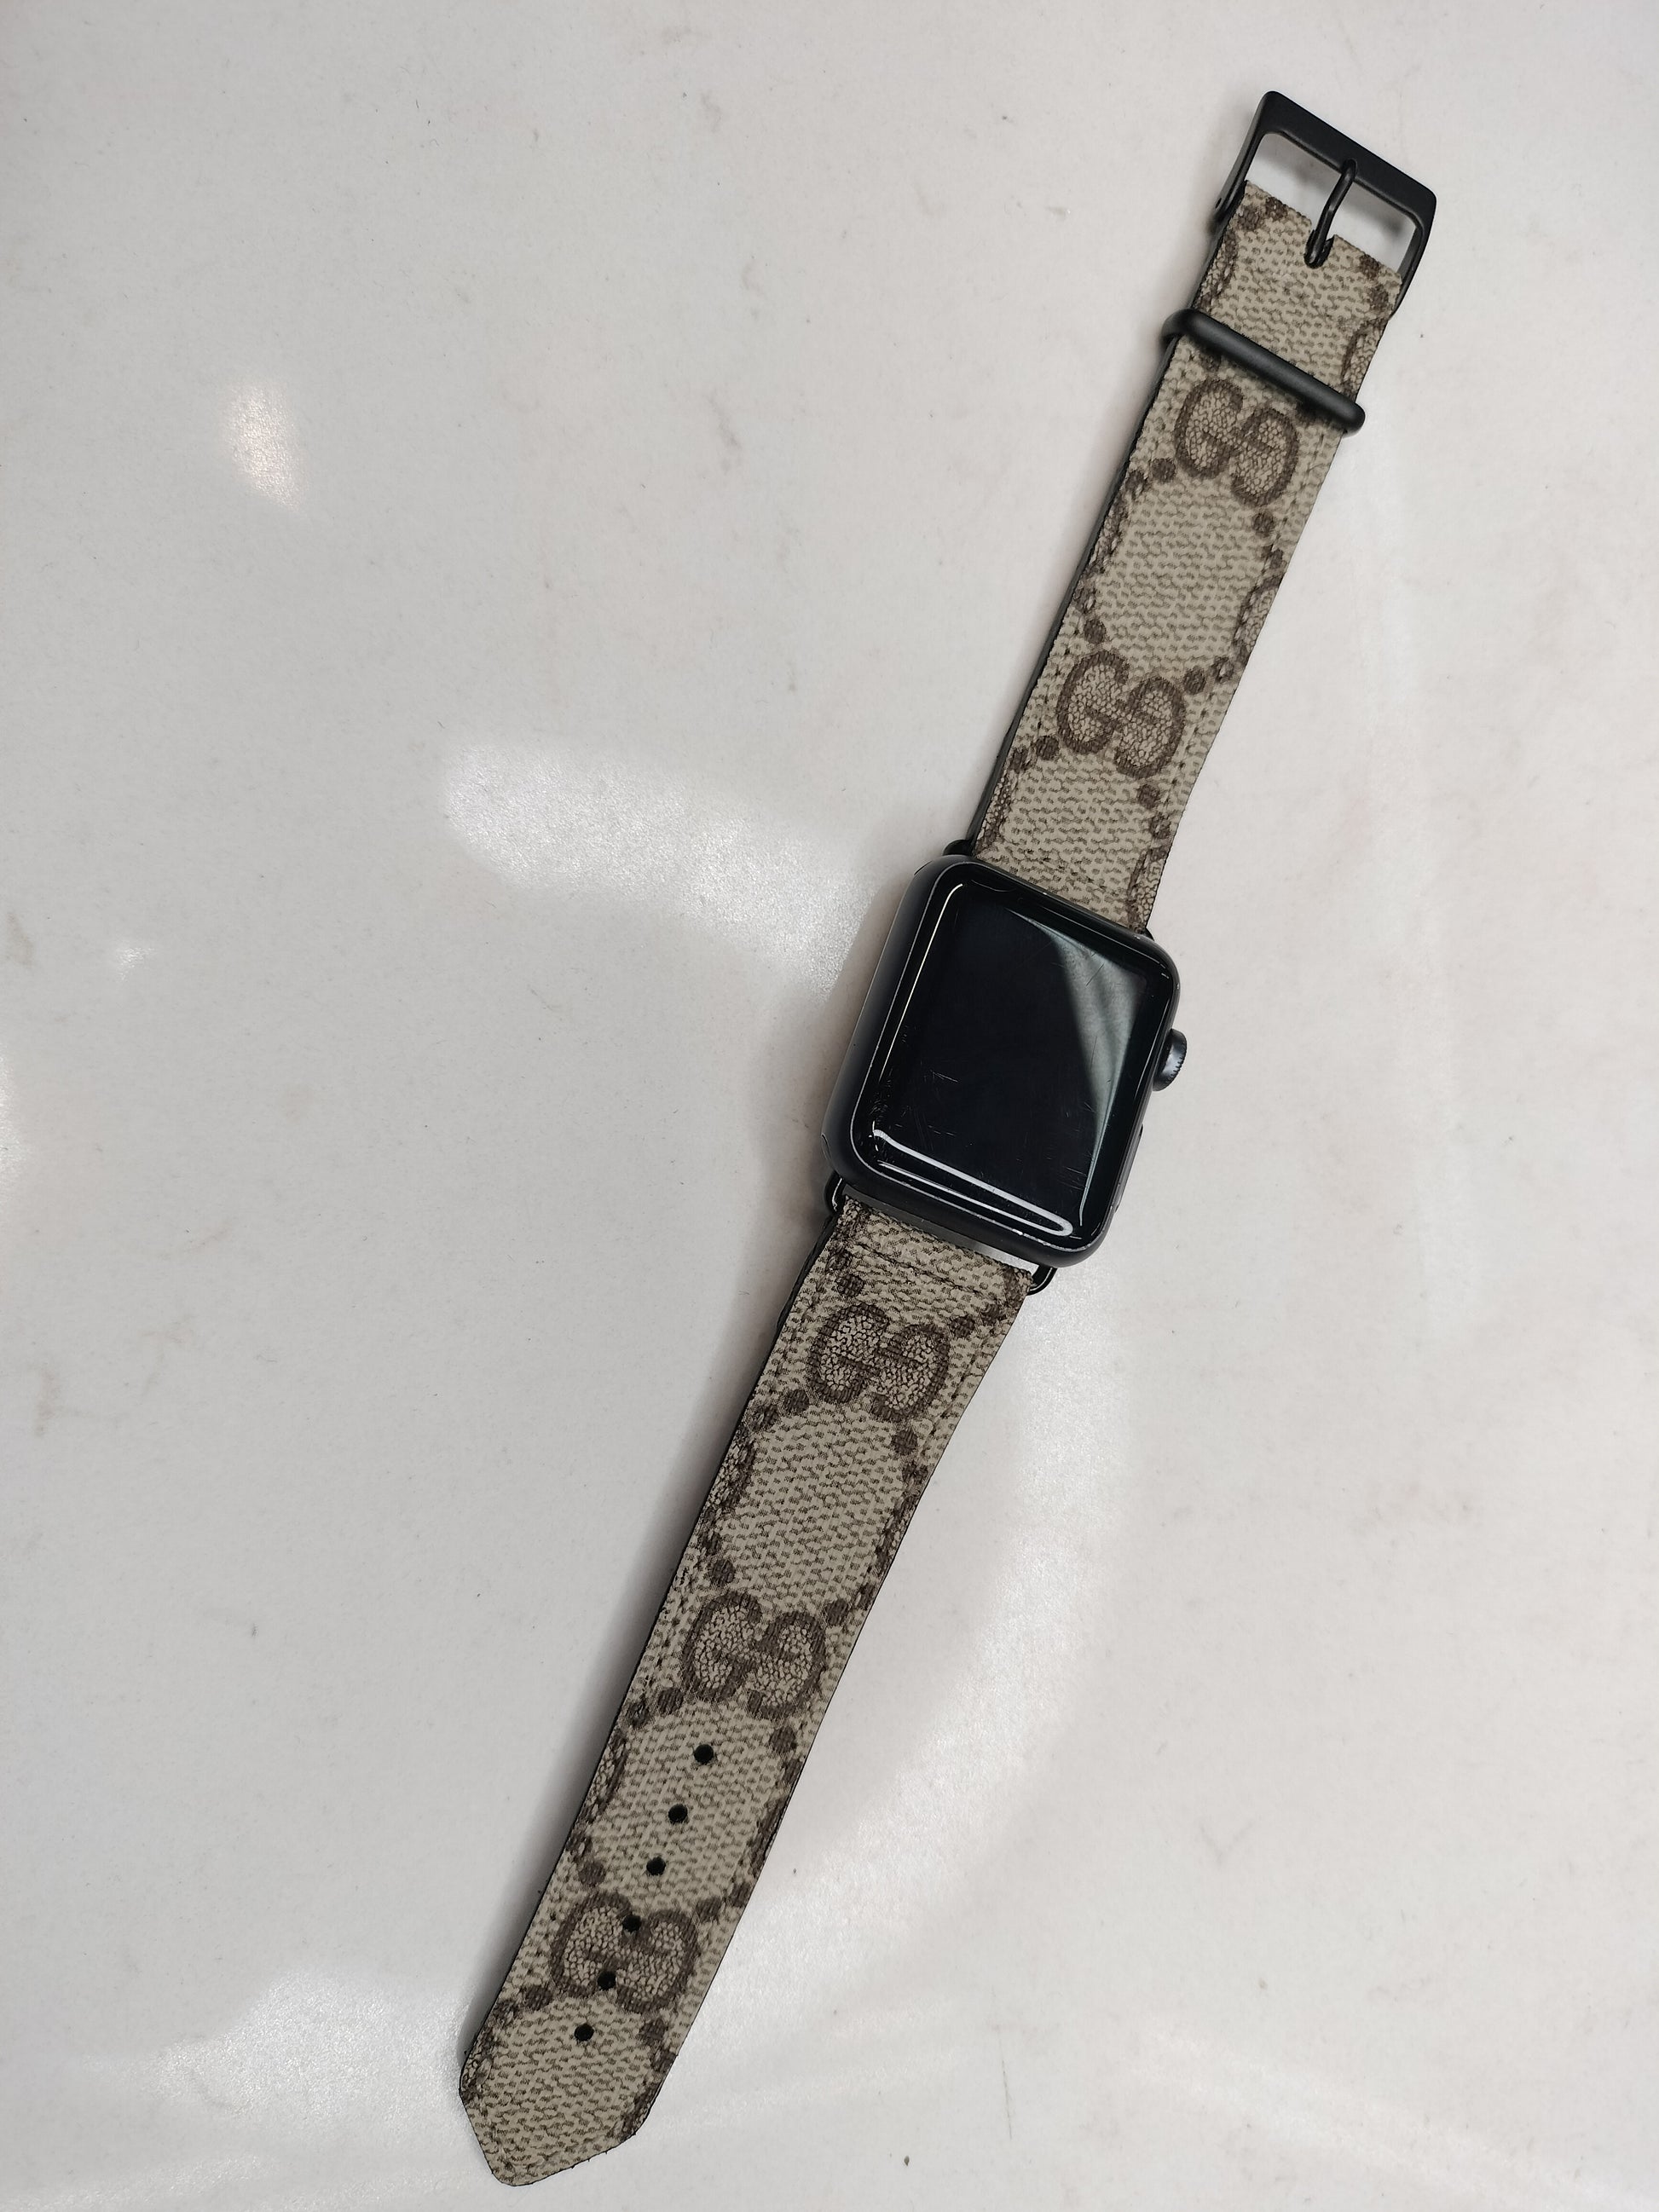 Upcycled Gucci Apple Watch Band Black